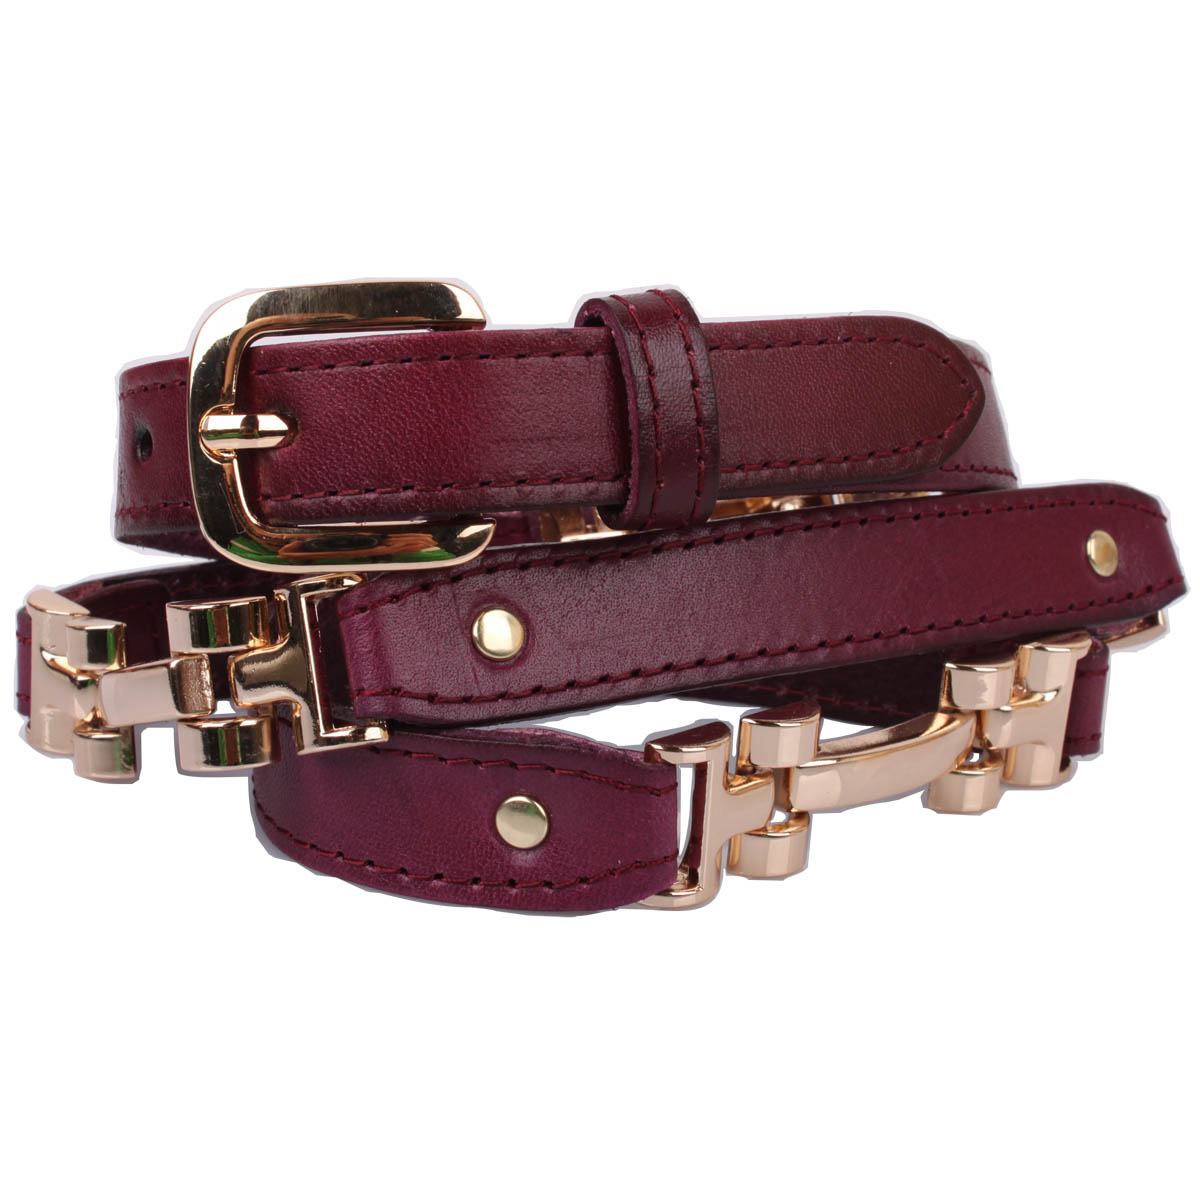 Belt female genuine leather sweet first layer of cowhide all-match paillette strap decoration